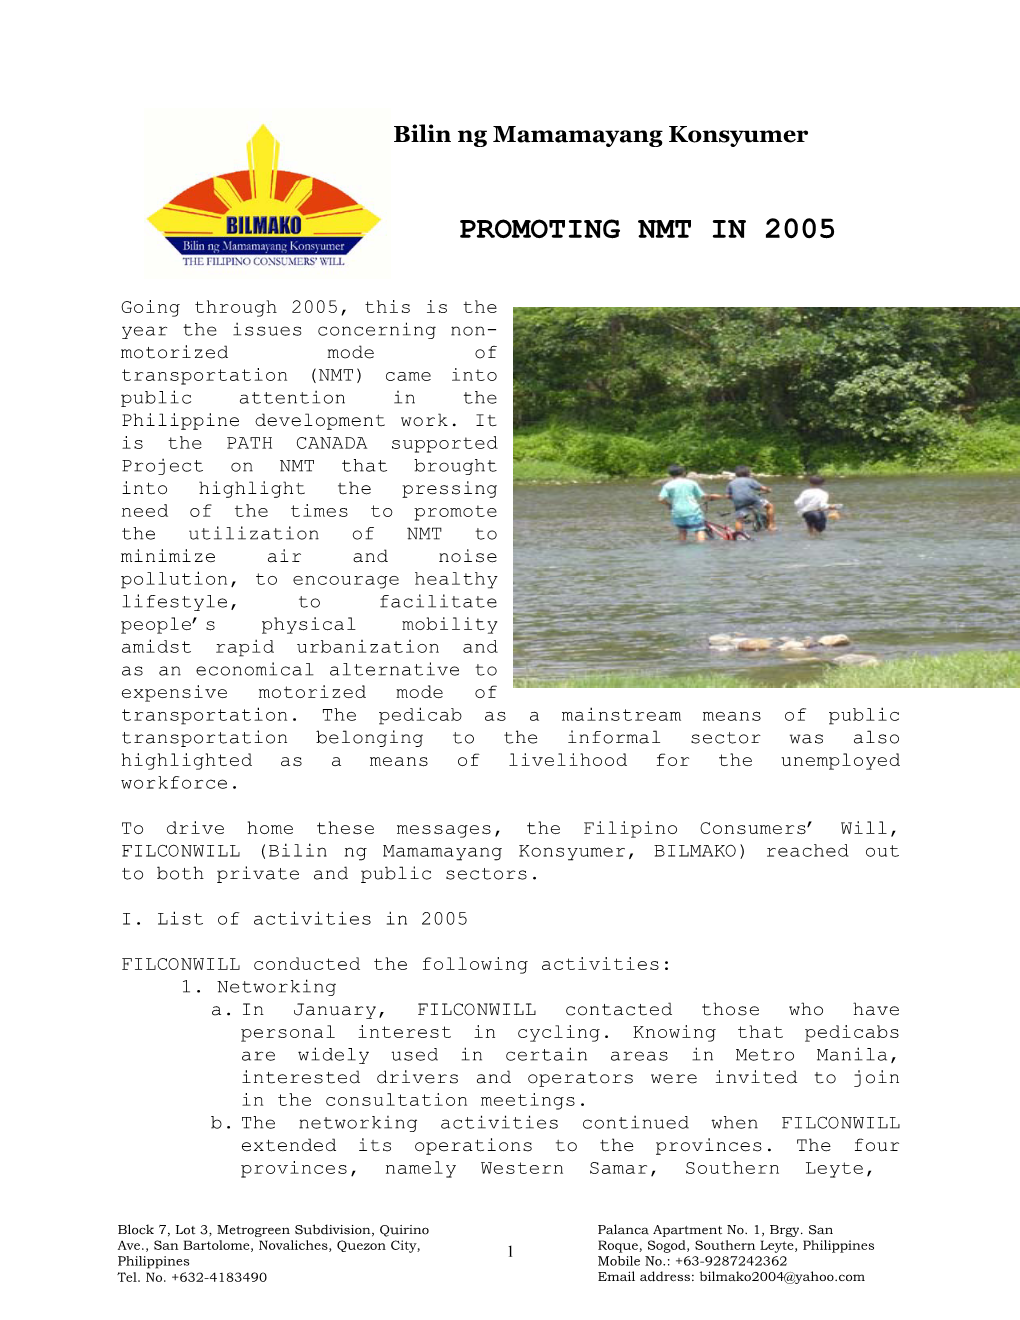 Promoting Non Motorized Transportation in the Philippines, Report 2005